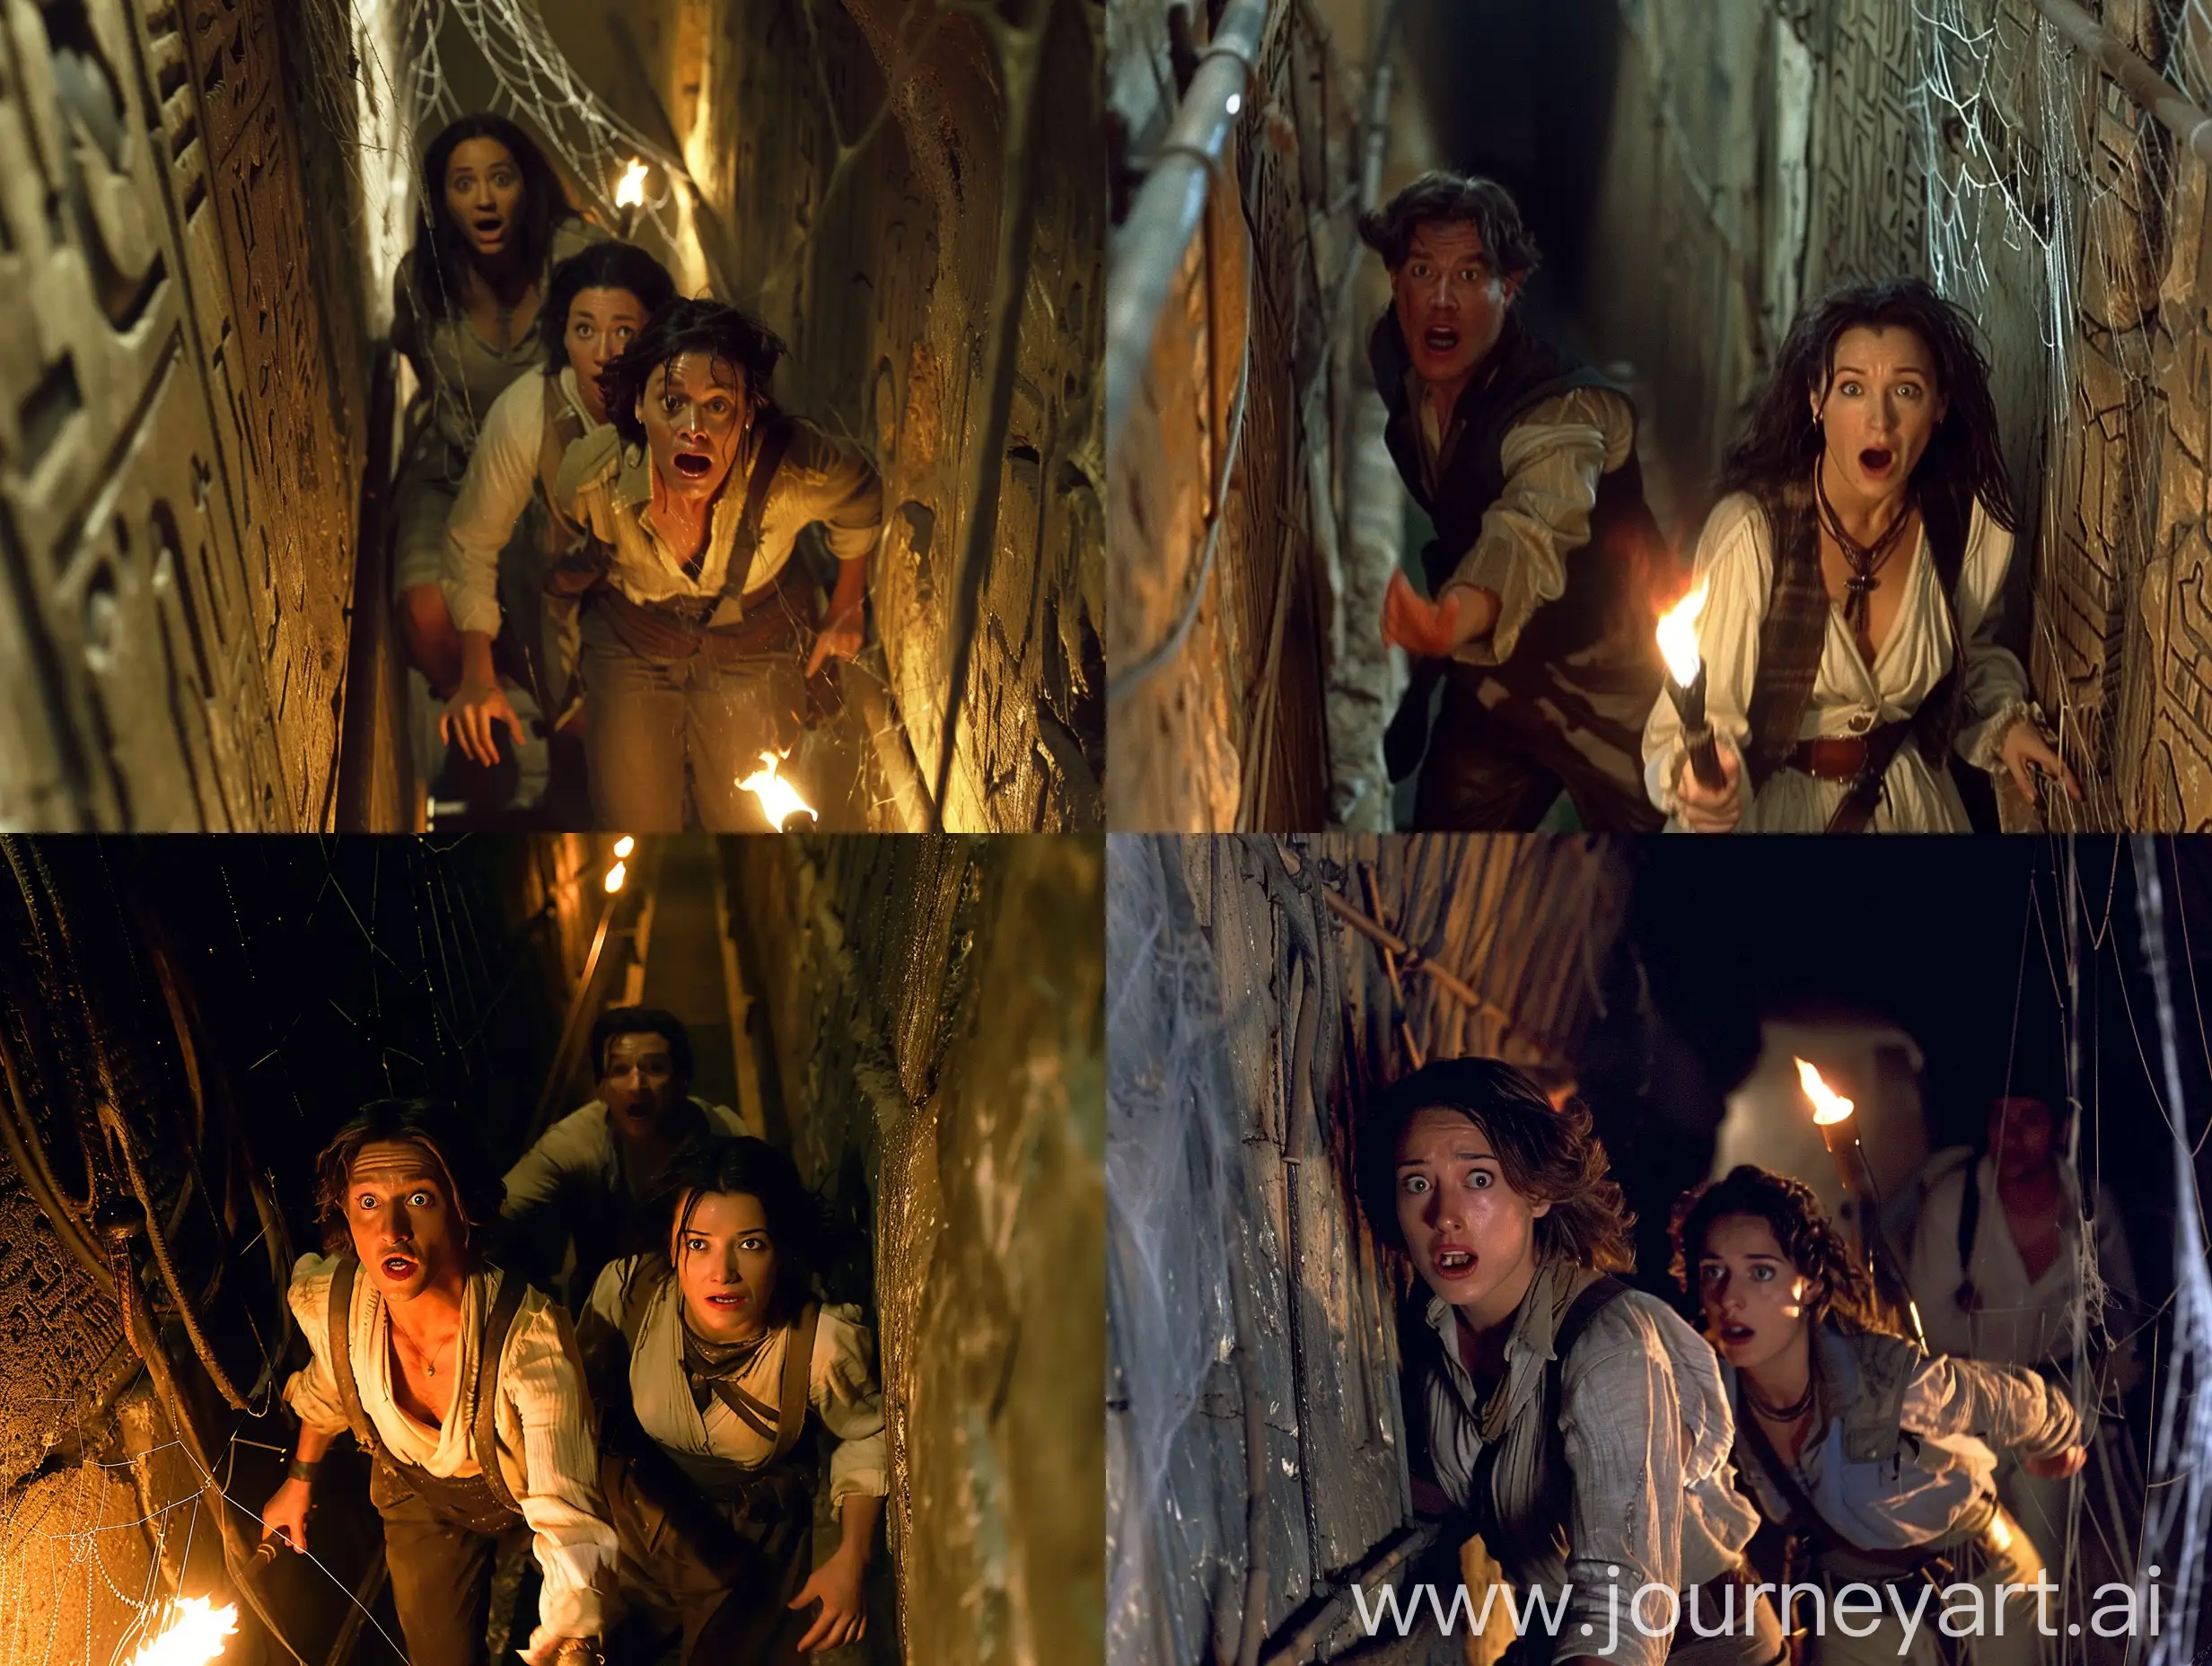 Brendan Fraser, Rachel Weisz, together in the movie The Mummy 1 and were very surprised and looking at the camera, they stood on a walkway in the Egyptian pyramid, which is very old and dark, and its walls are damaged due to the old age and spider webs. It can be seen on the walls, the corridor is very dark, and one of these people has a torch in his hand, which is the only source of light in this environment.